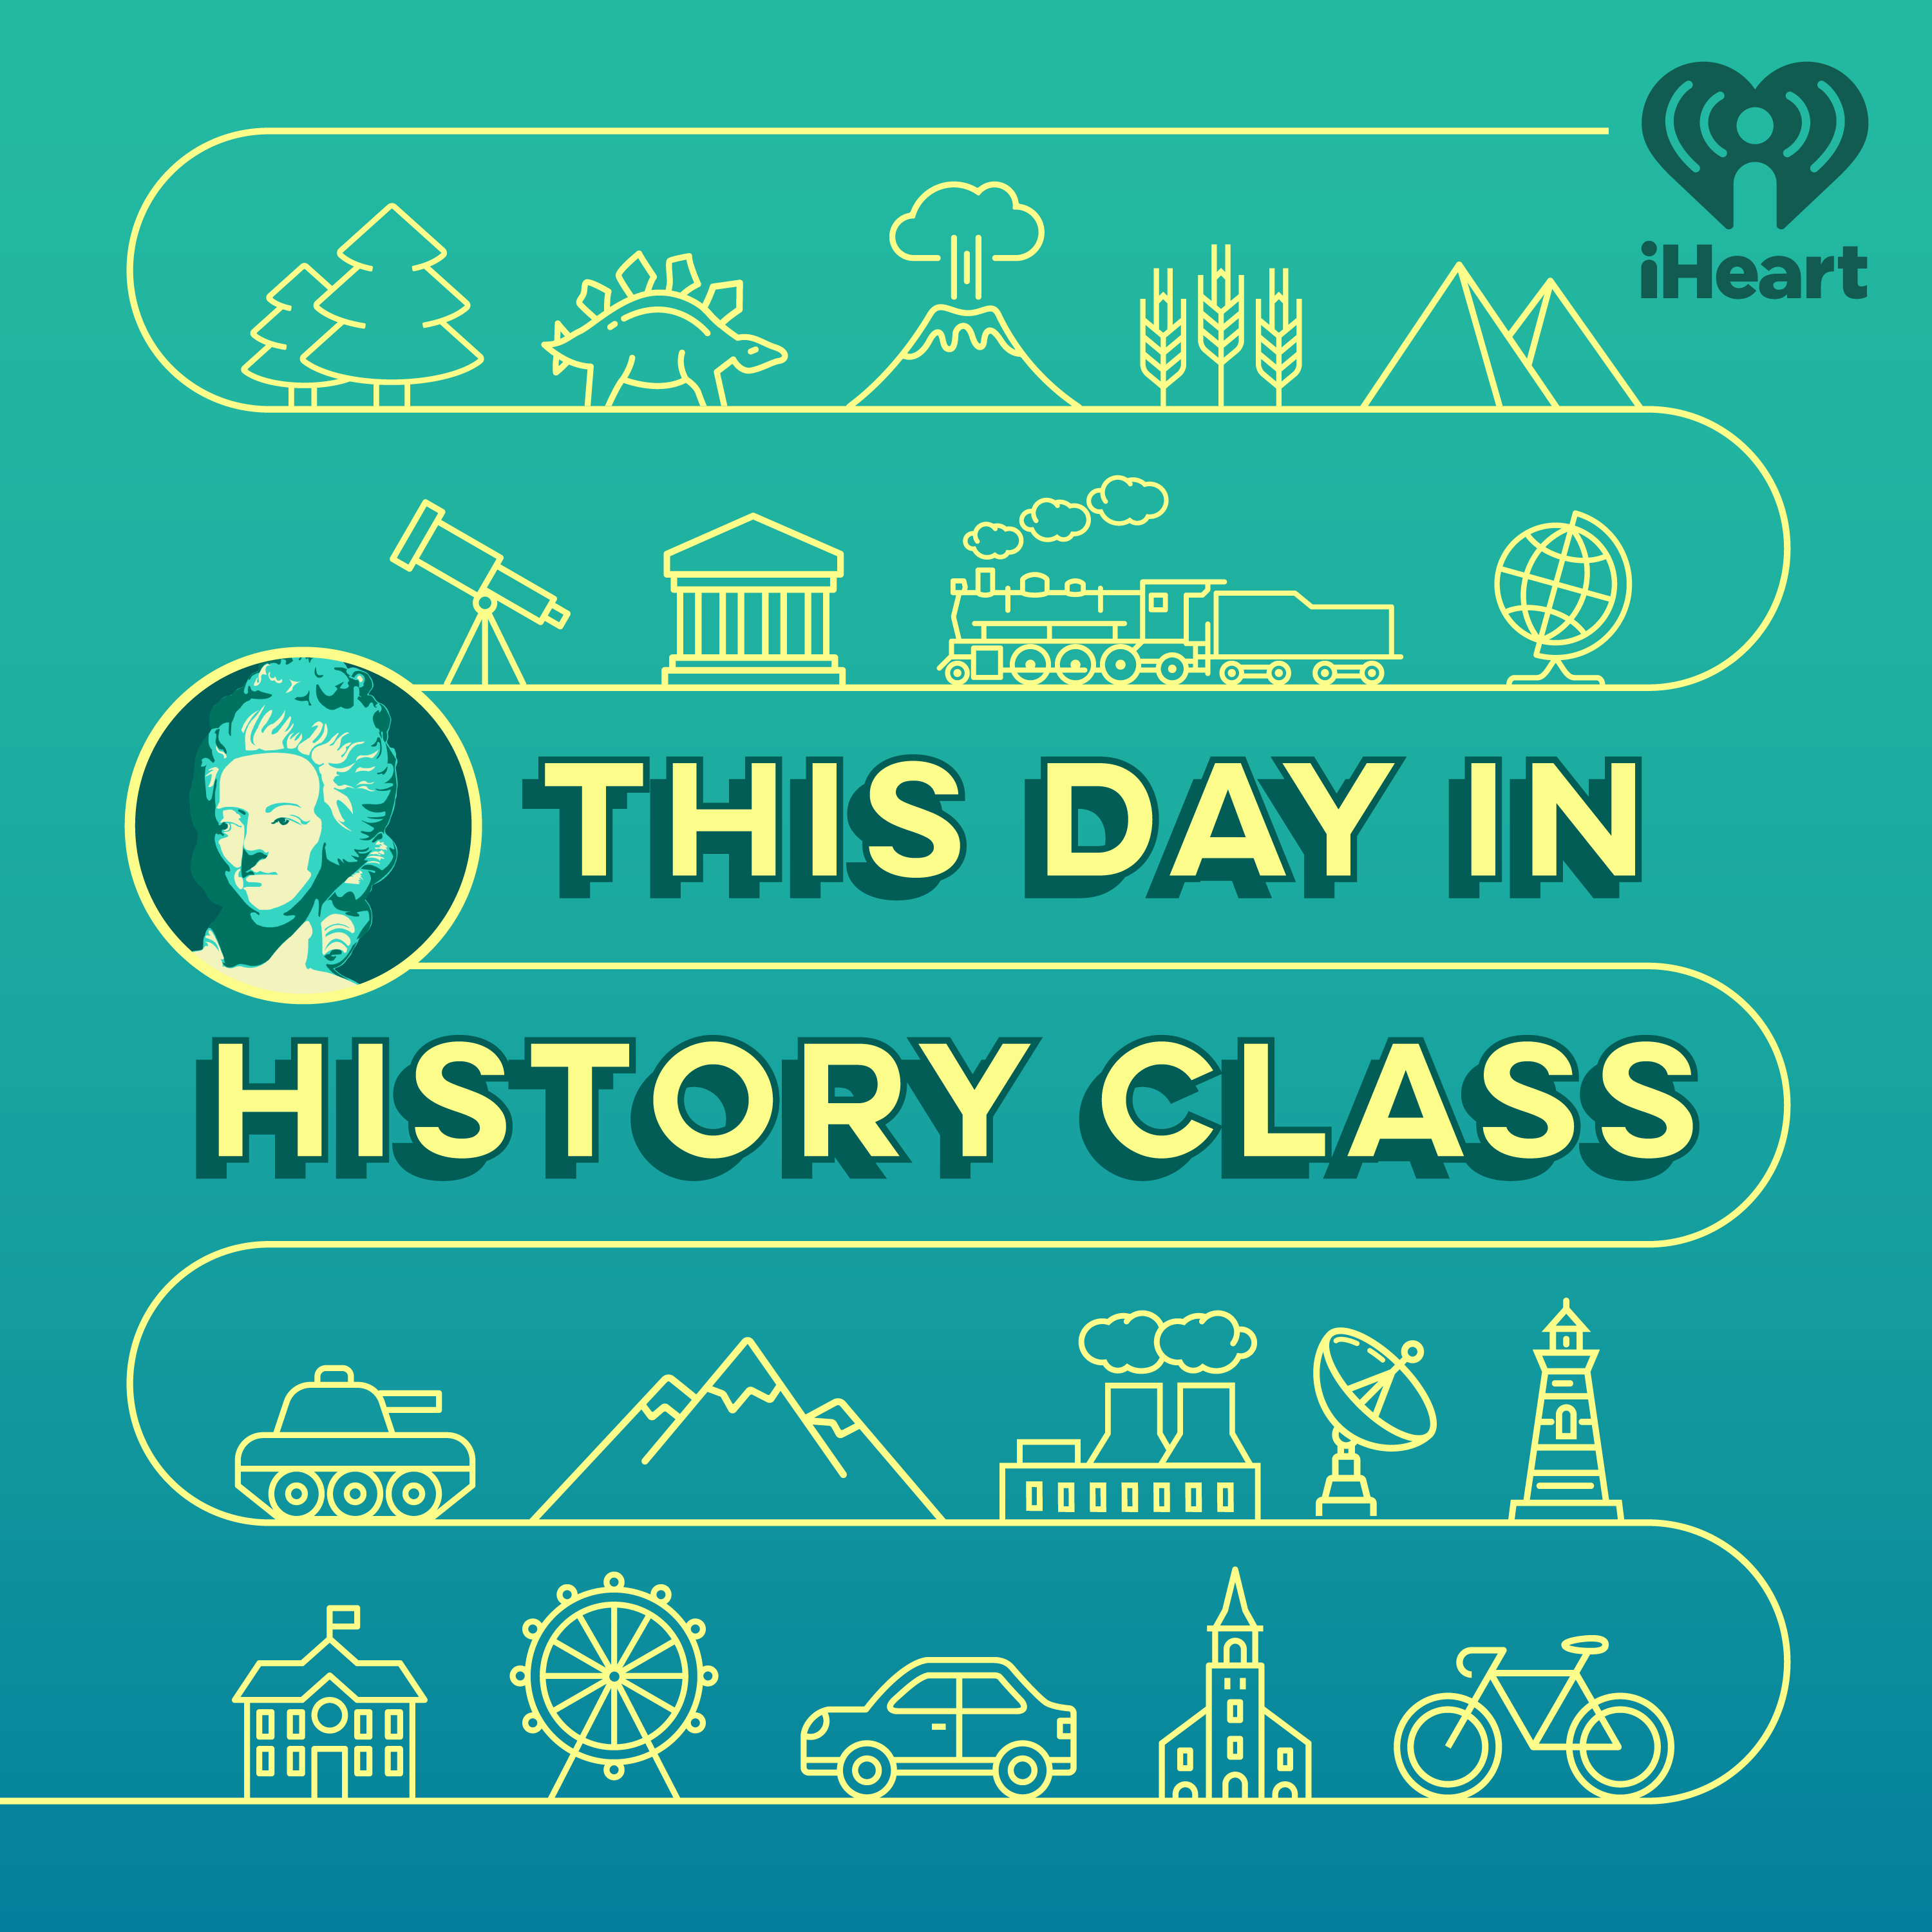 This Day In History Class - December 11th